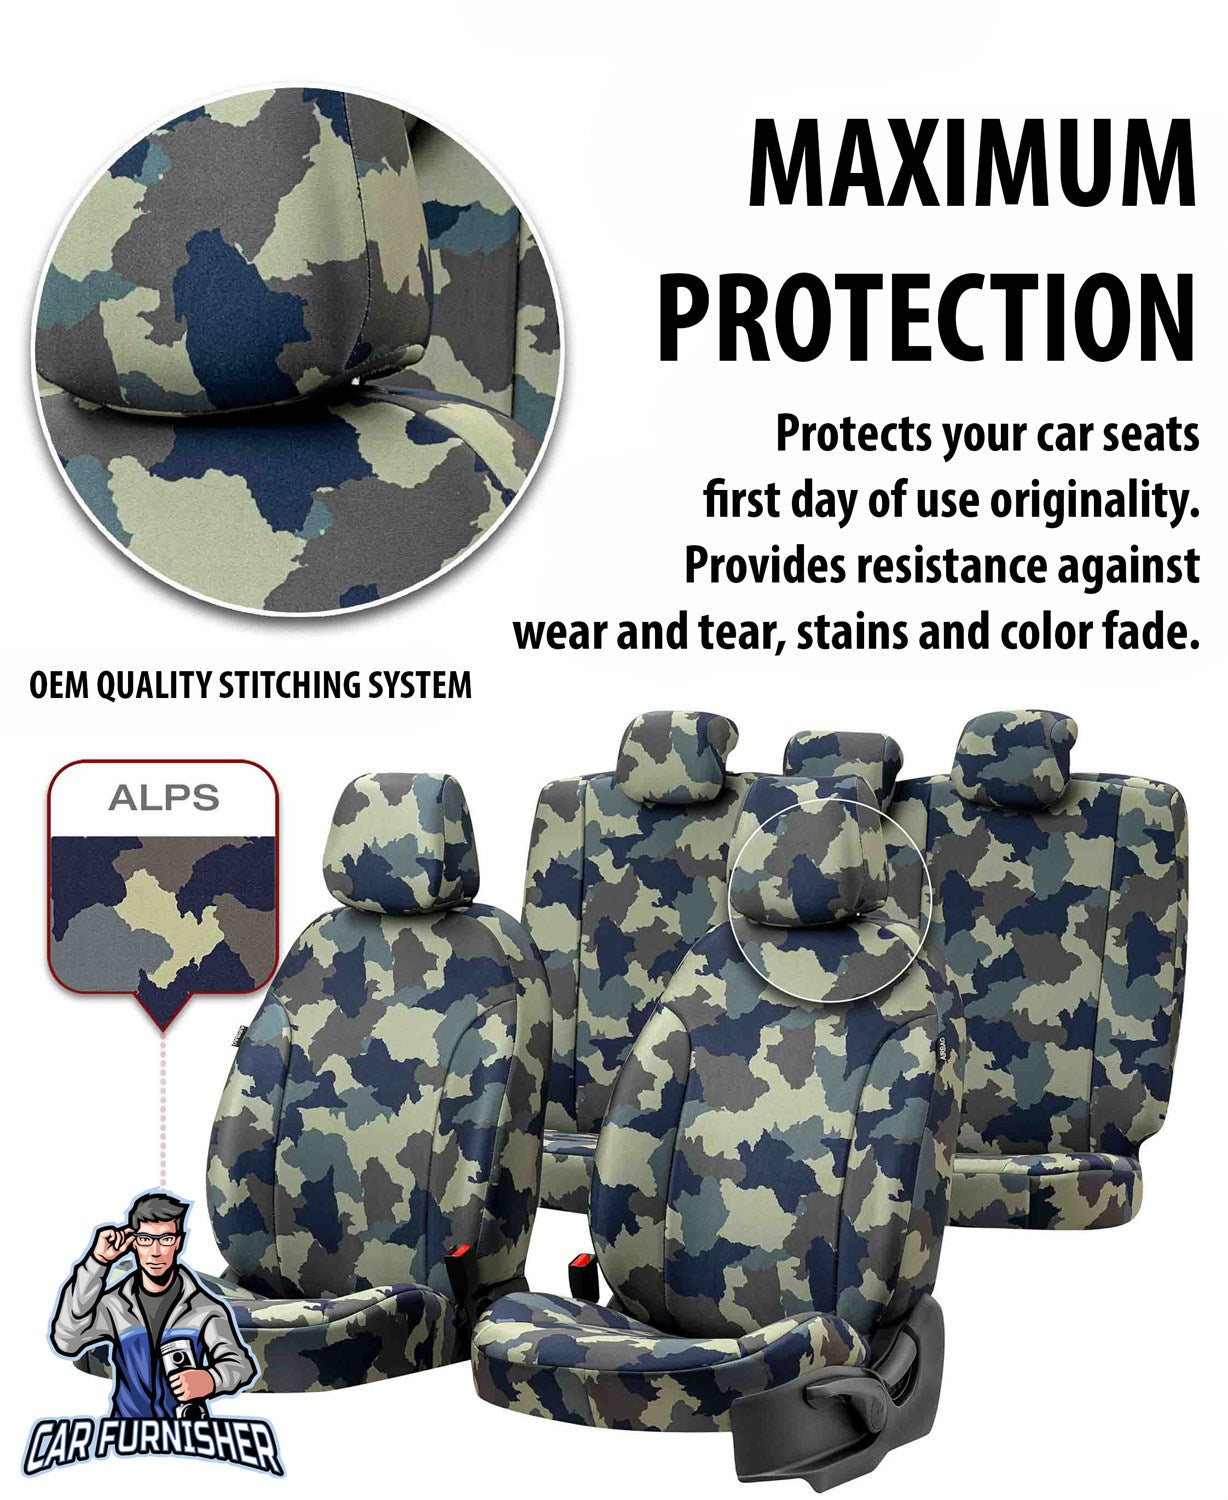 Opel Frontera Seat Cover Camouflage Waterproof Design Montblanc Camo Waterproof Fabric